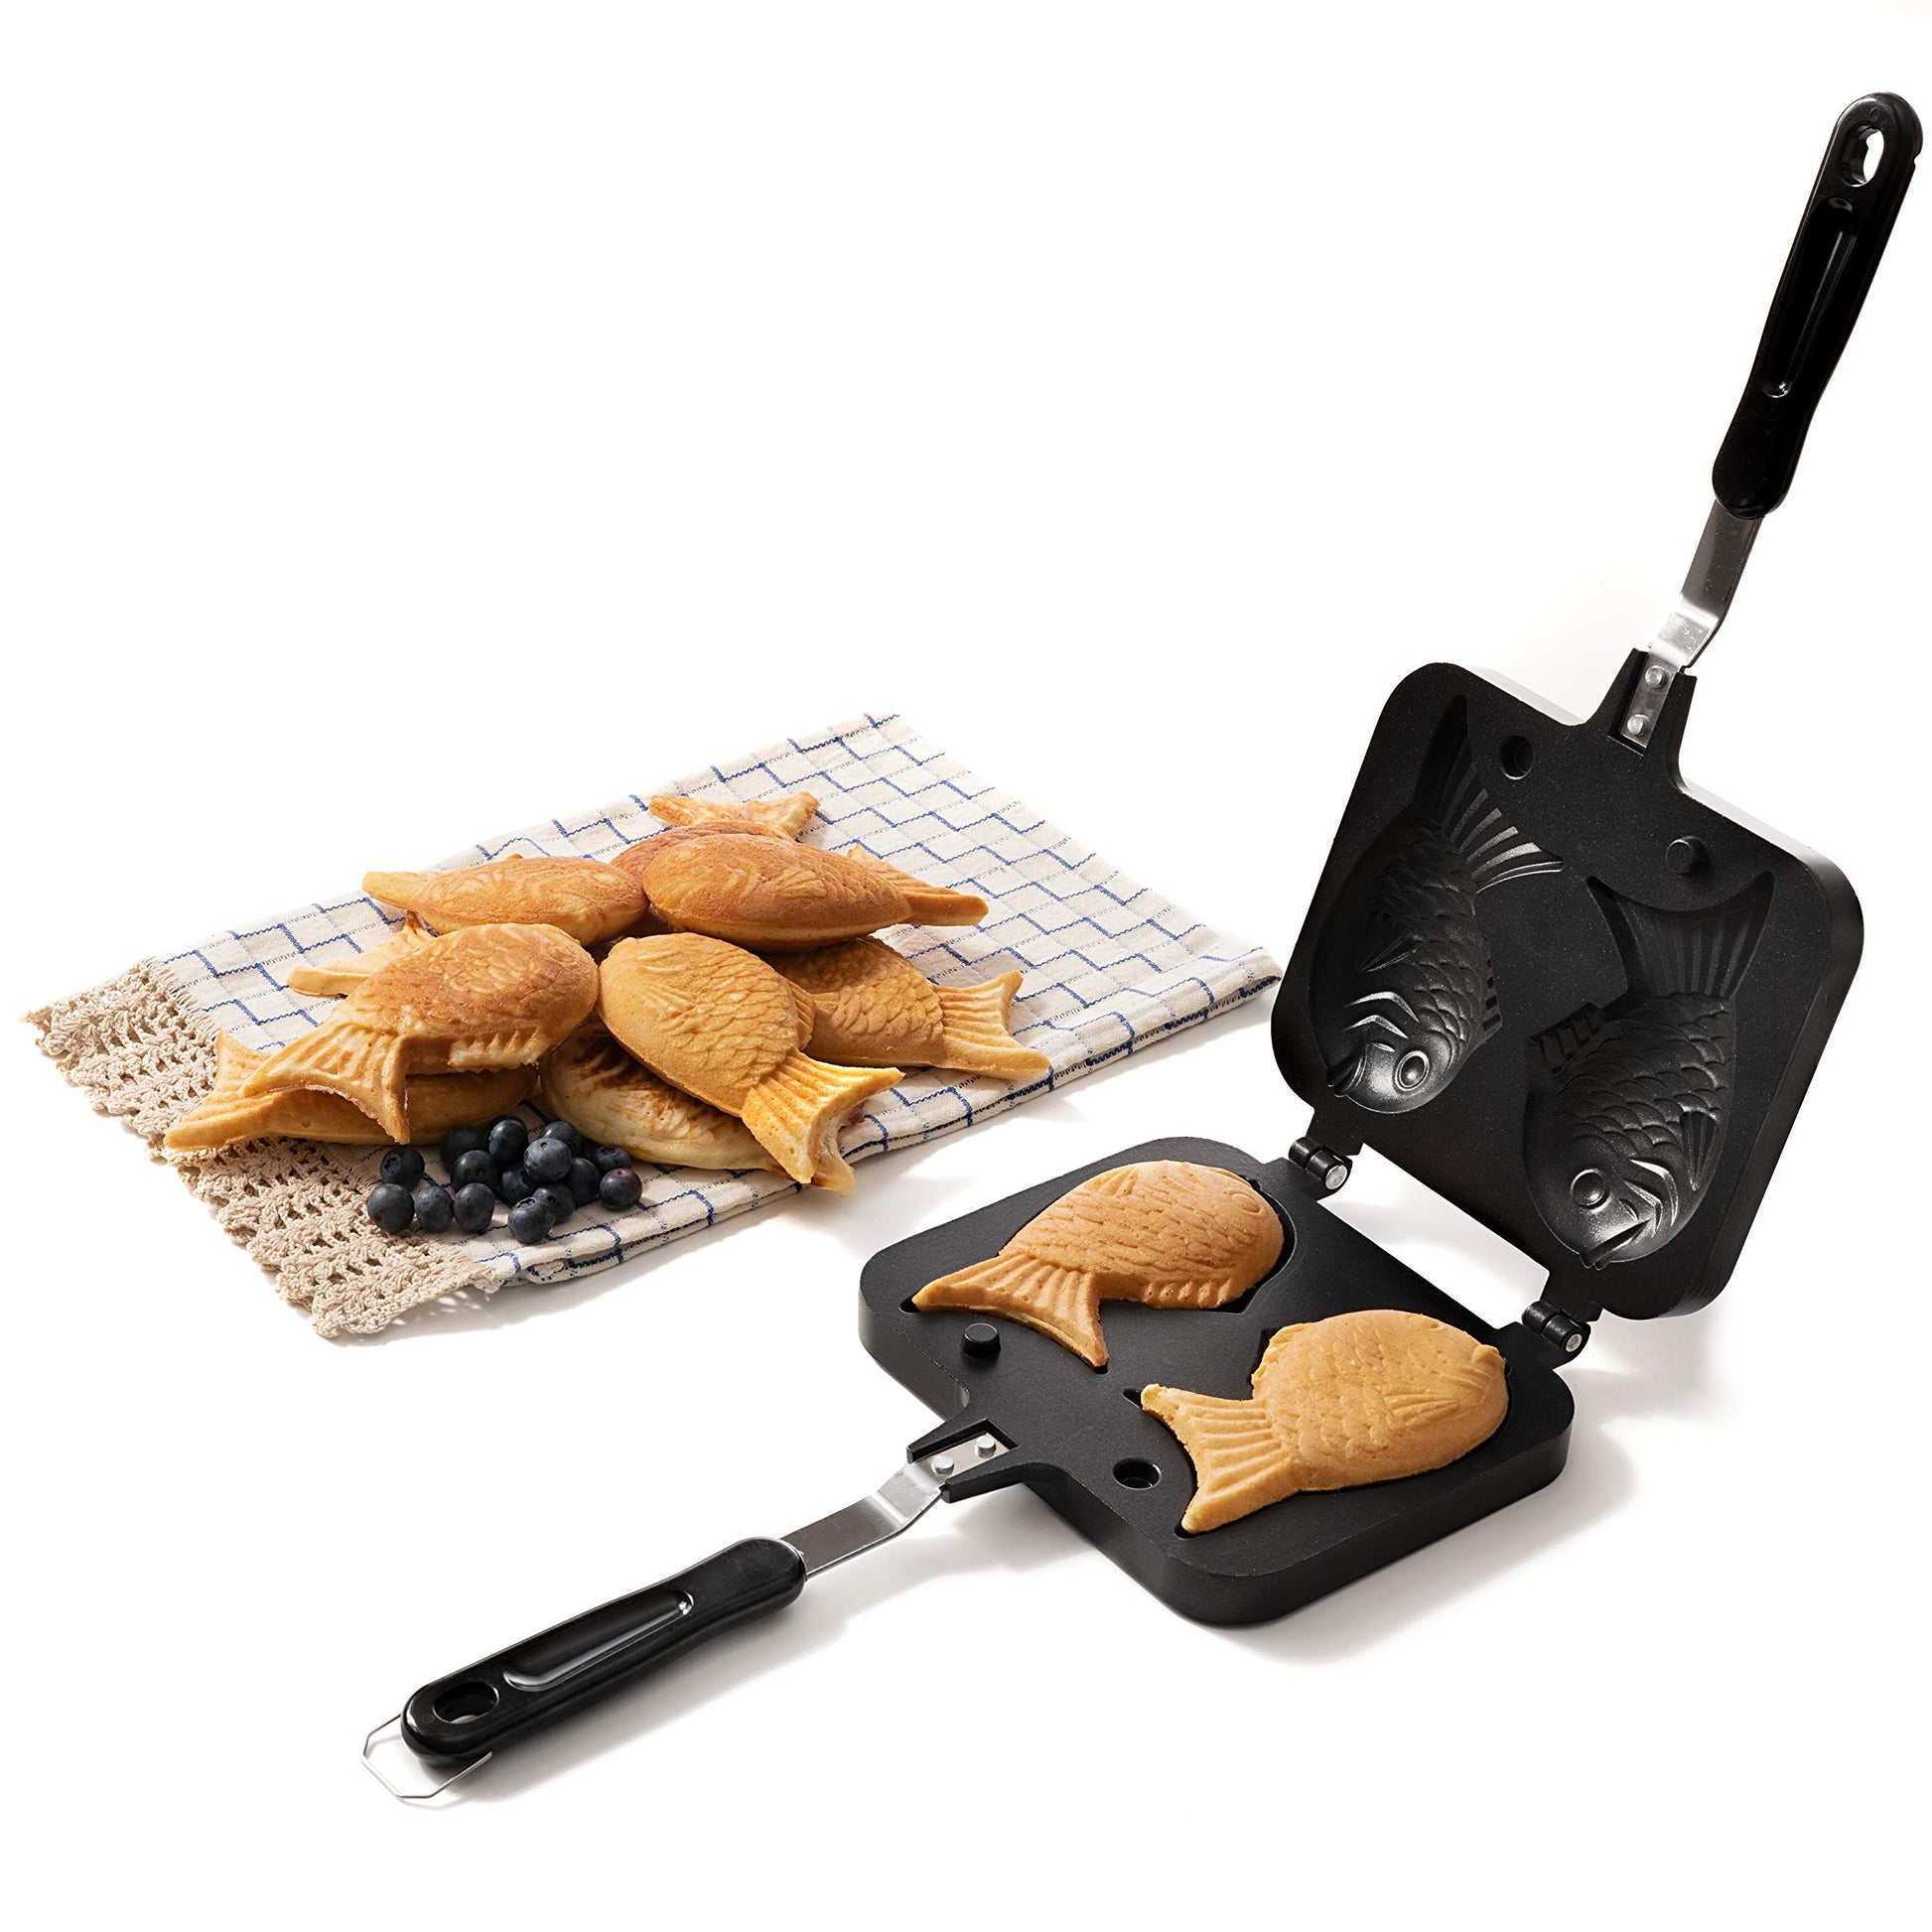 KUHA Cast Iron Aebleskiver Pan for Authentic Danish Stuffed Pancakes -  Complete with Bamboo Skewers, Silicone Handle and Oven Mitt